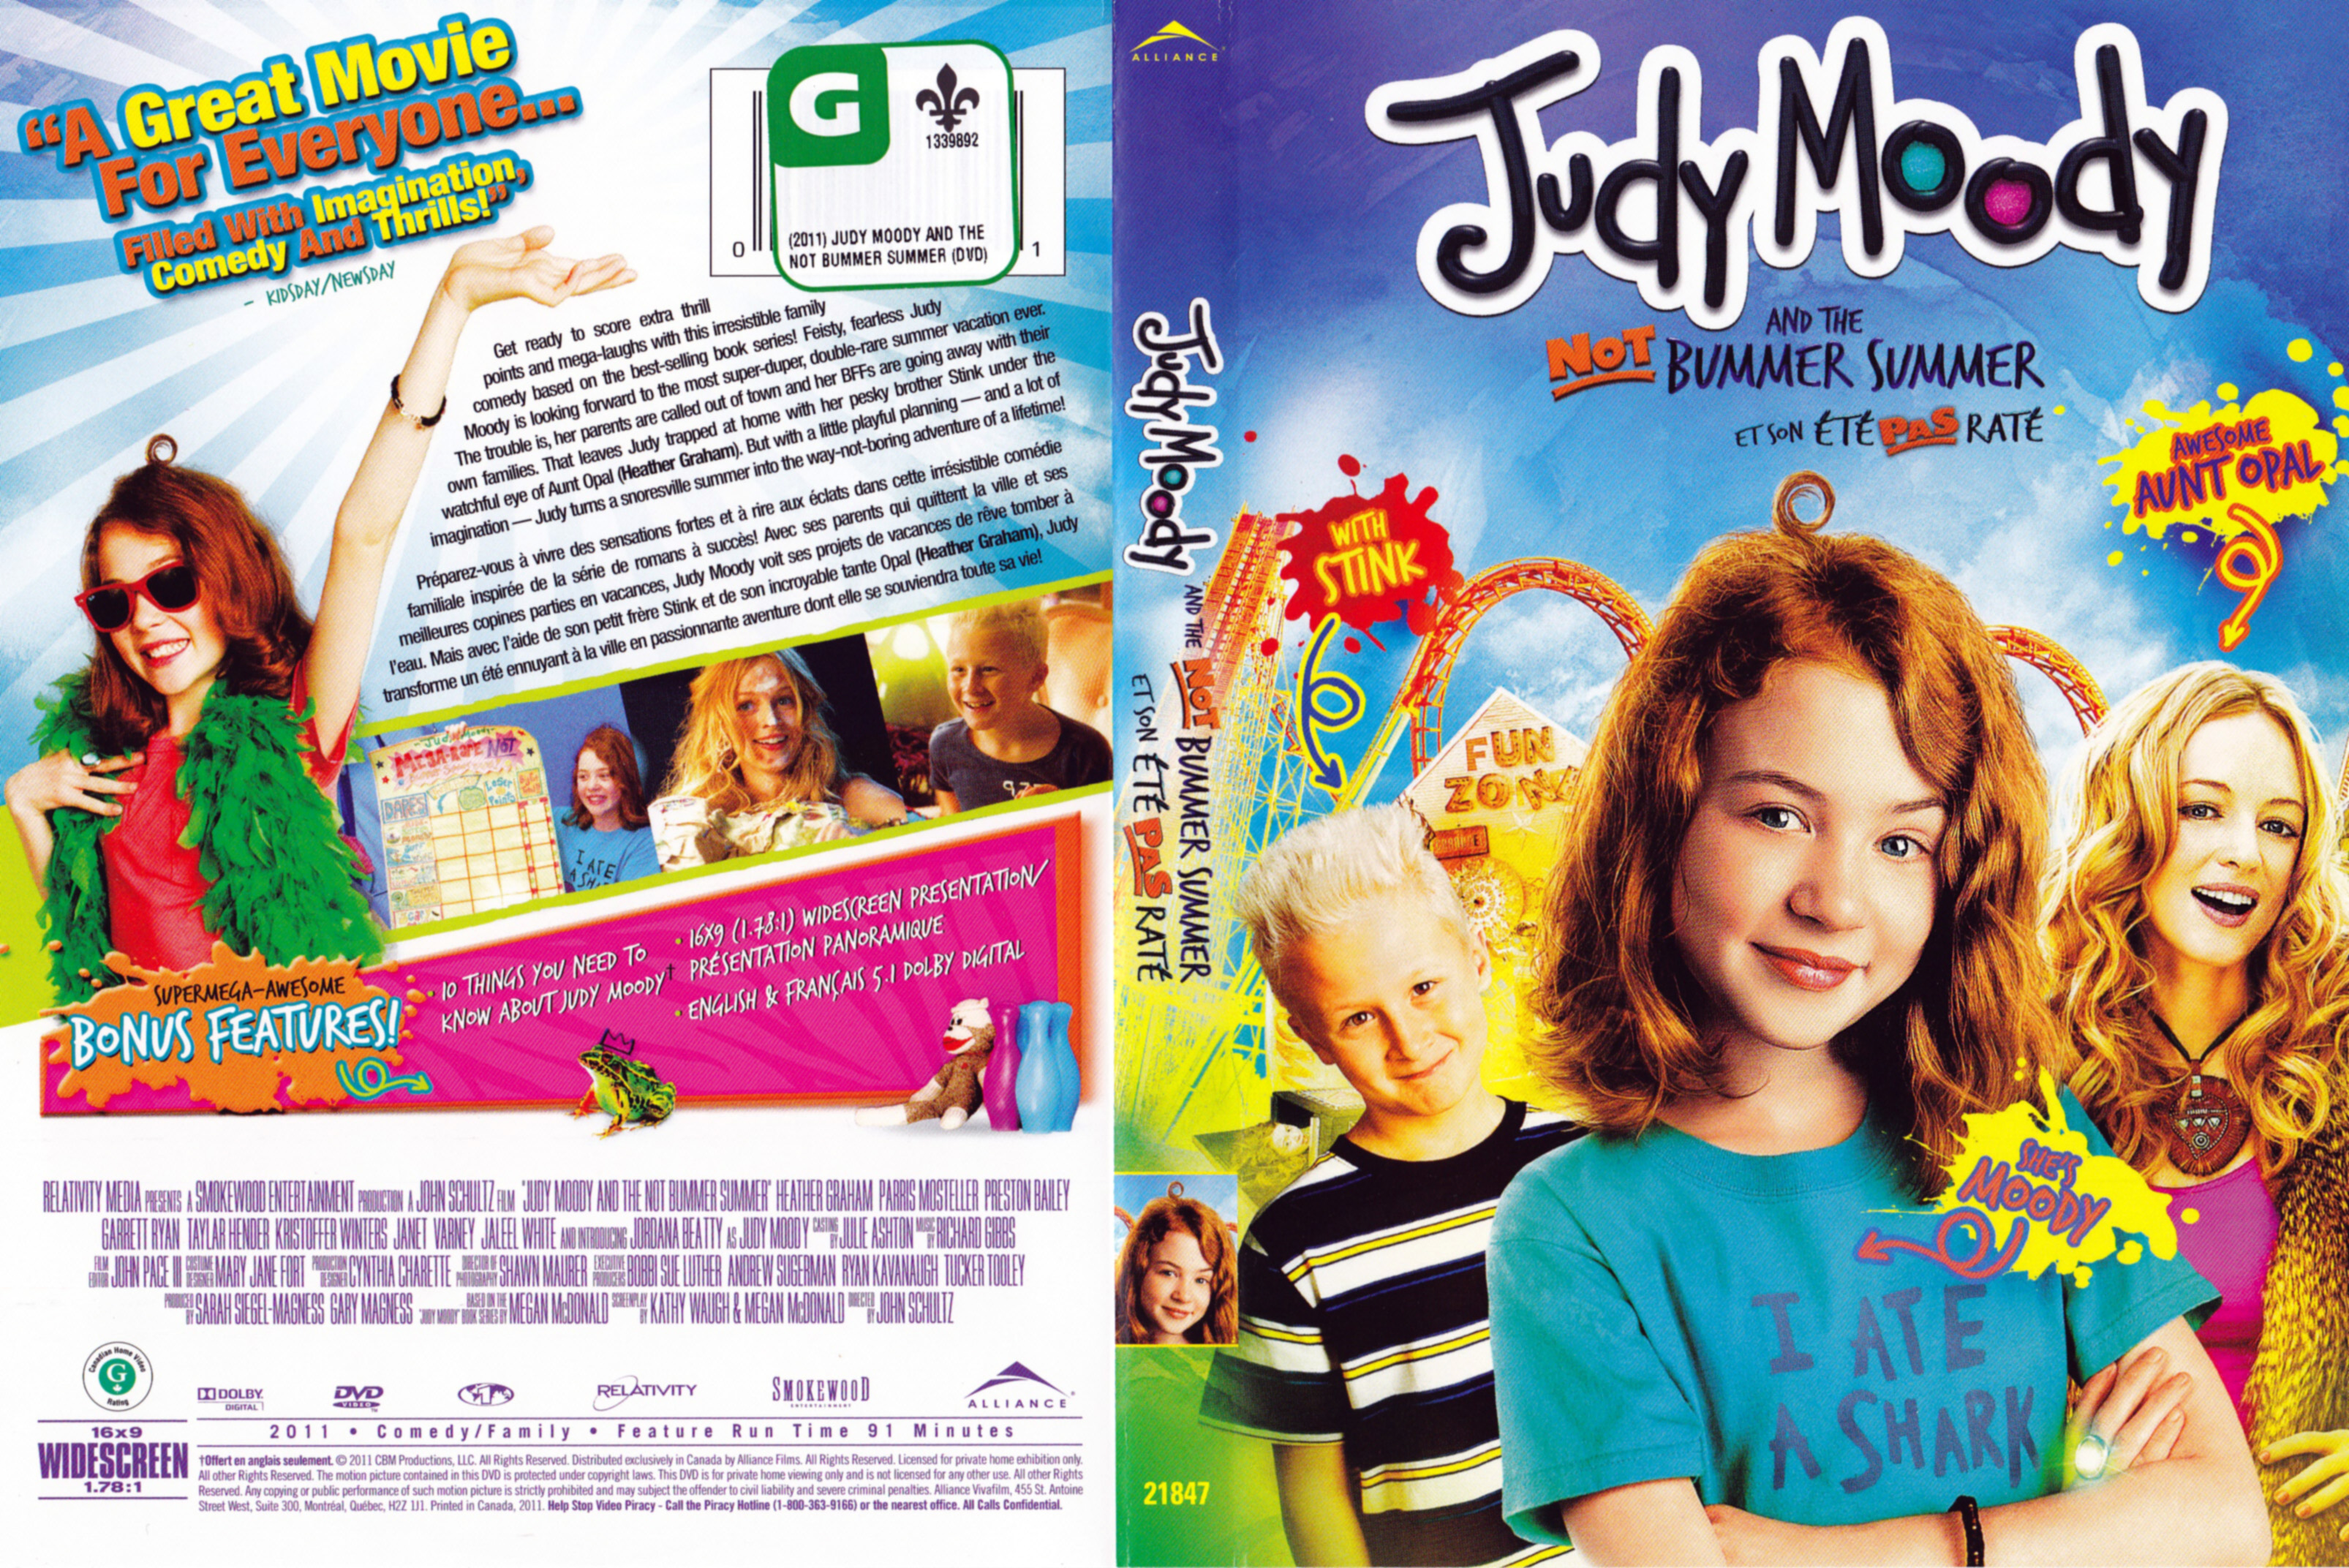 Jaquette DVD Judy Moody et son t pas rat - Judy Moody and the not bummer summer (Canadienne)